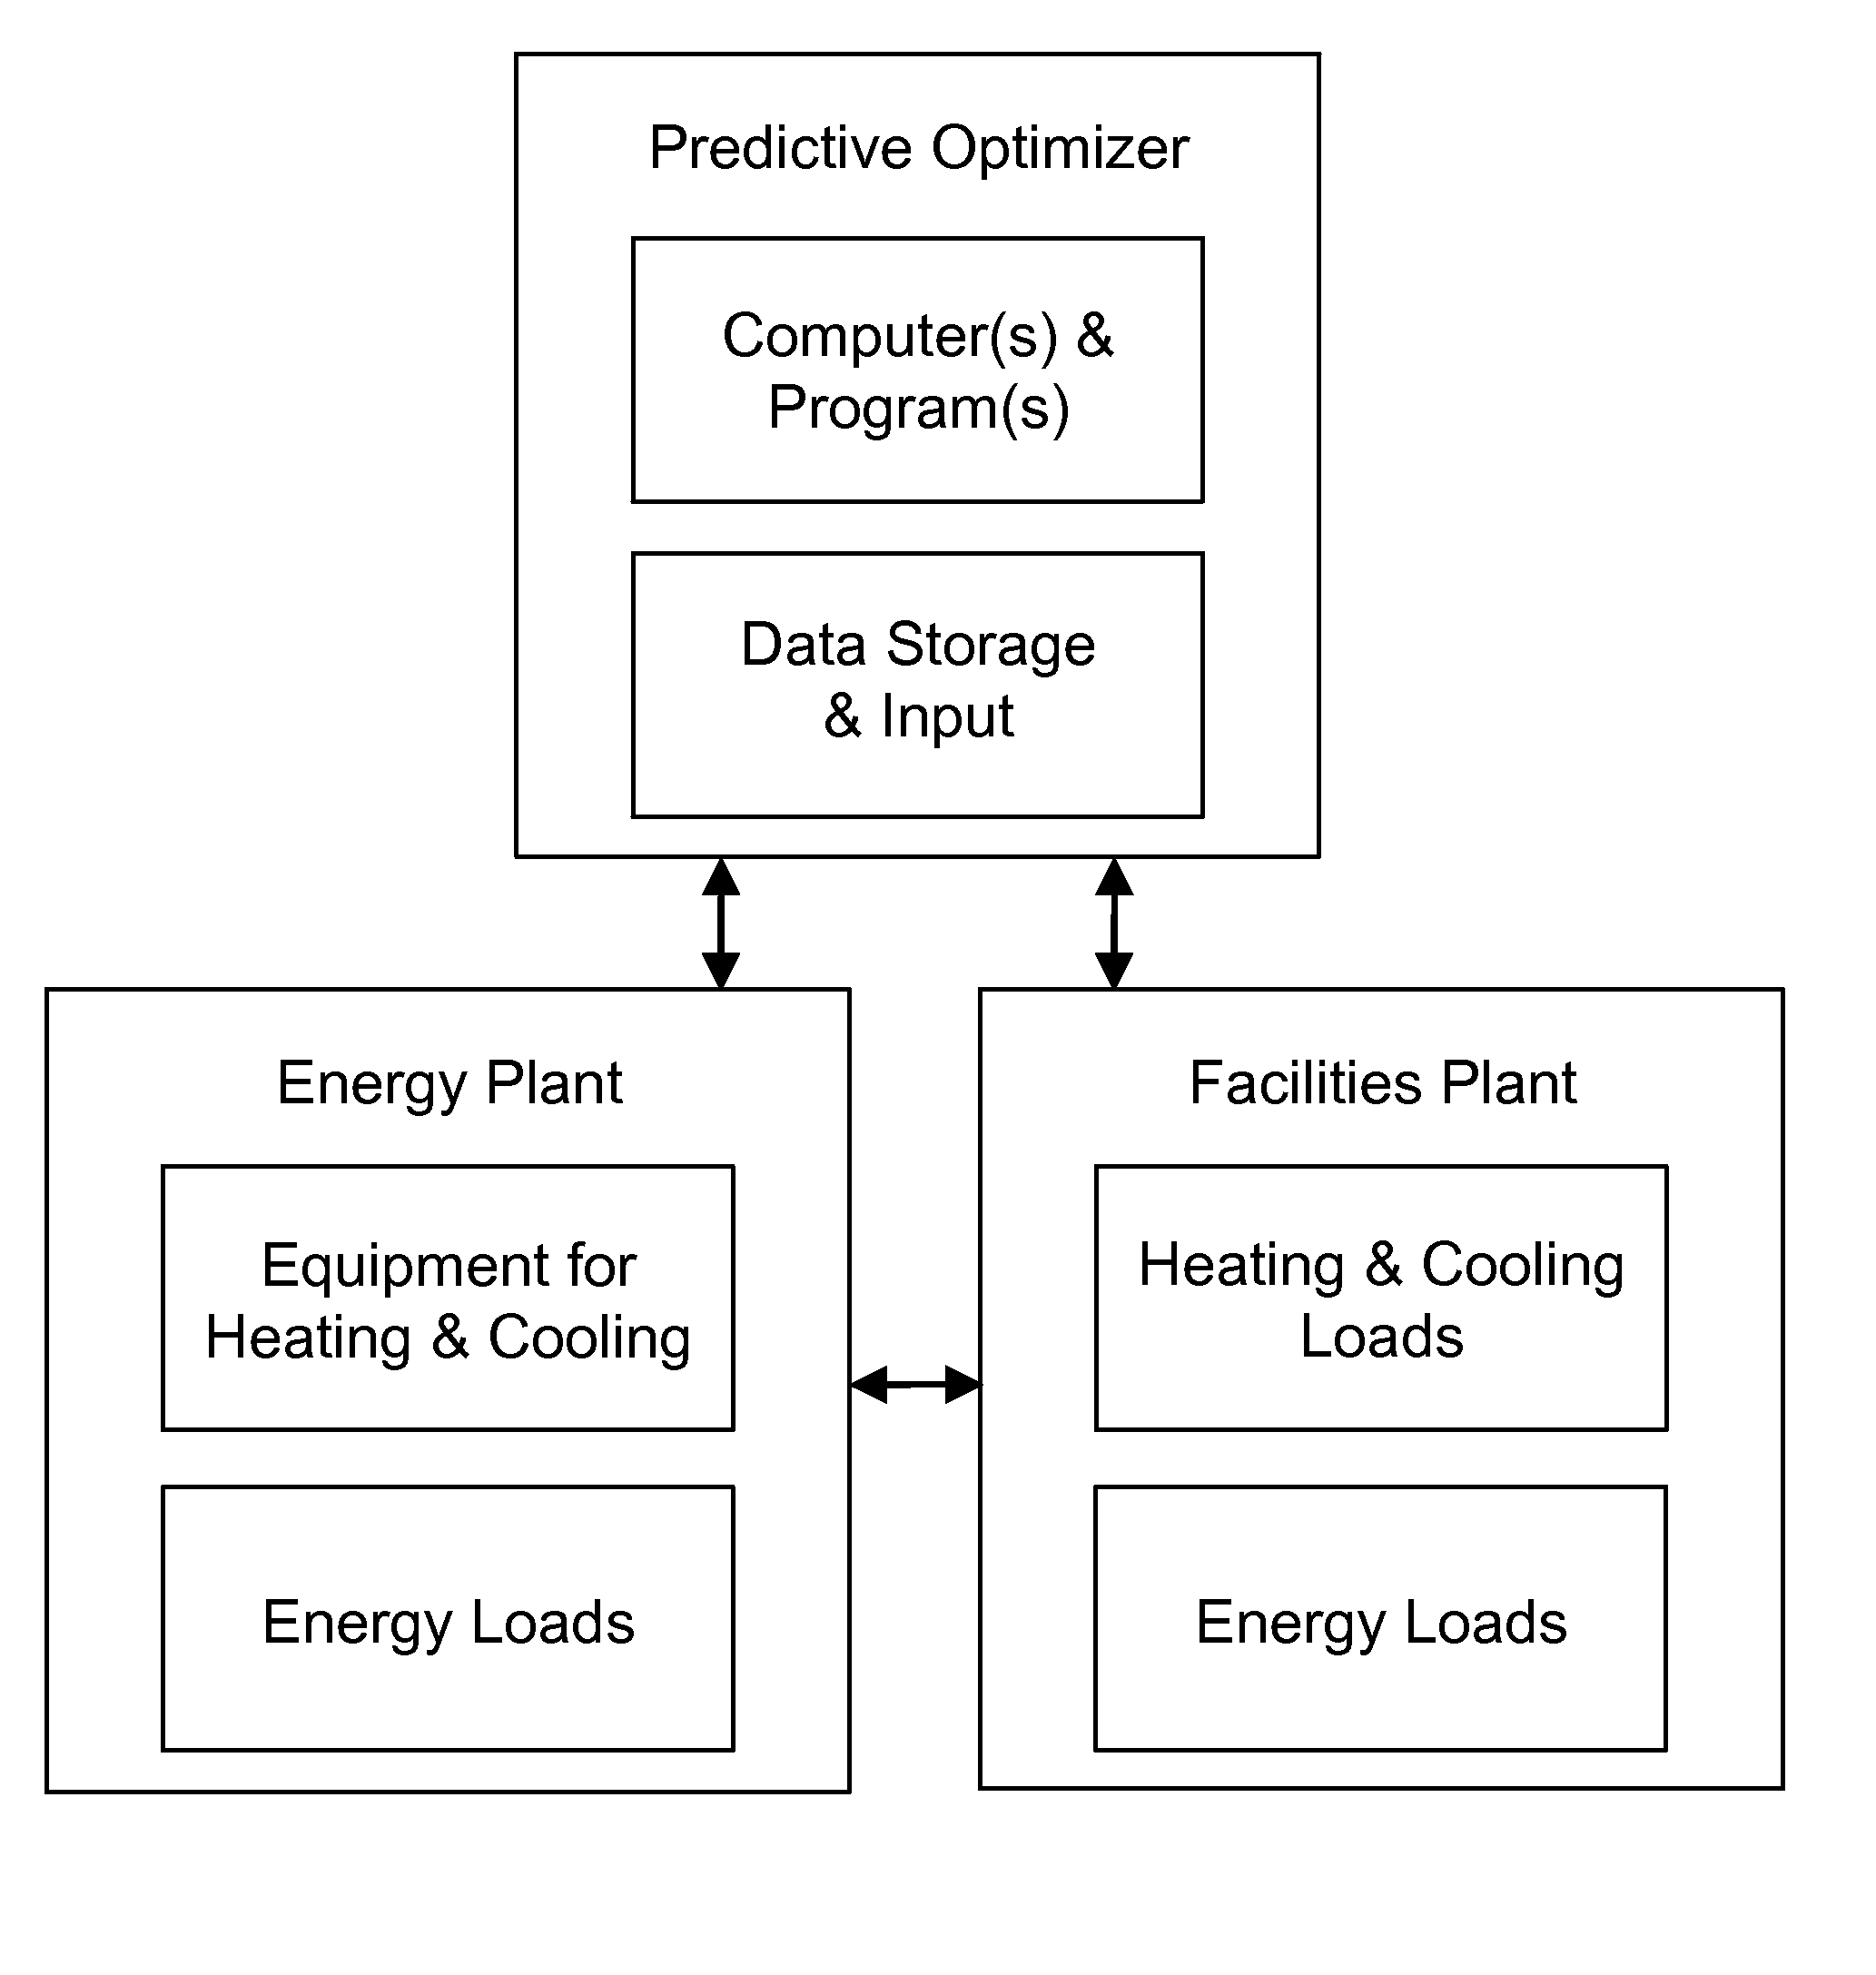 Energy Plant Design and Operation